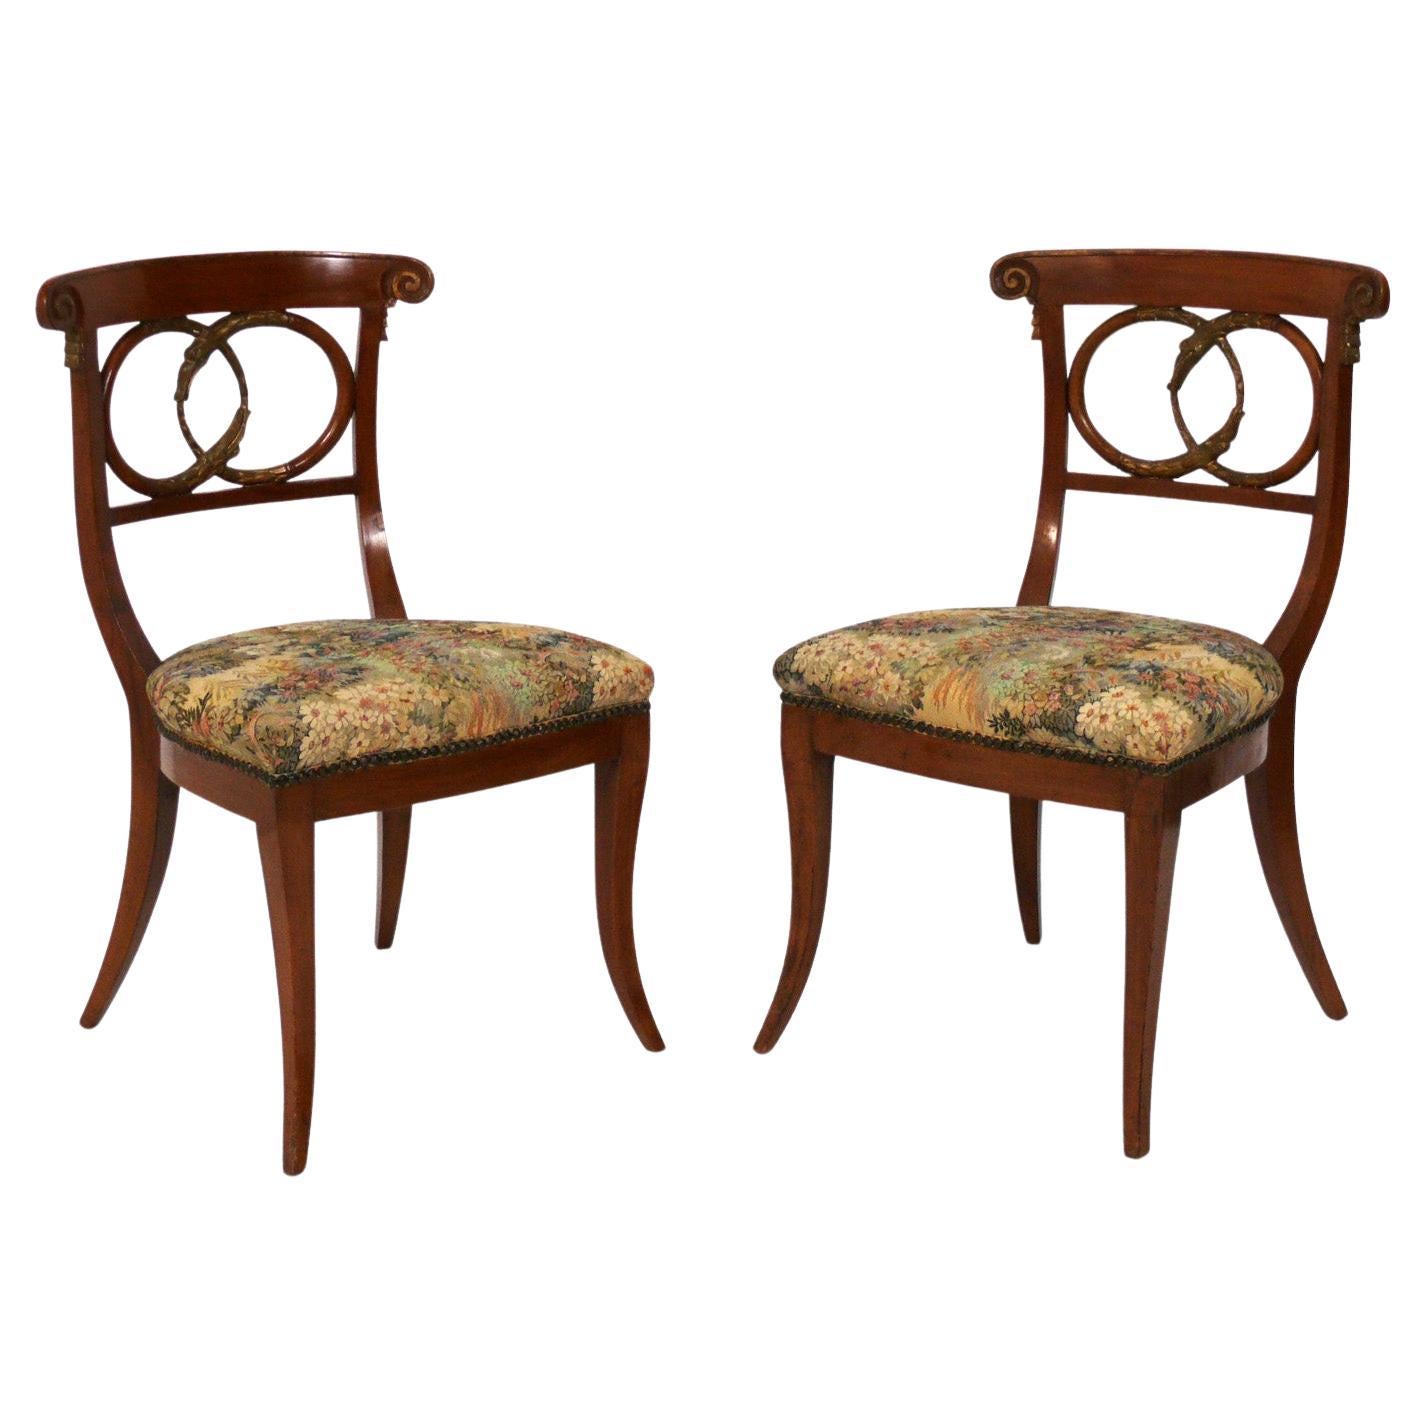 Pair of Curvaceous Italian Chairs with Gilt Ouroboros Decoration